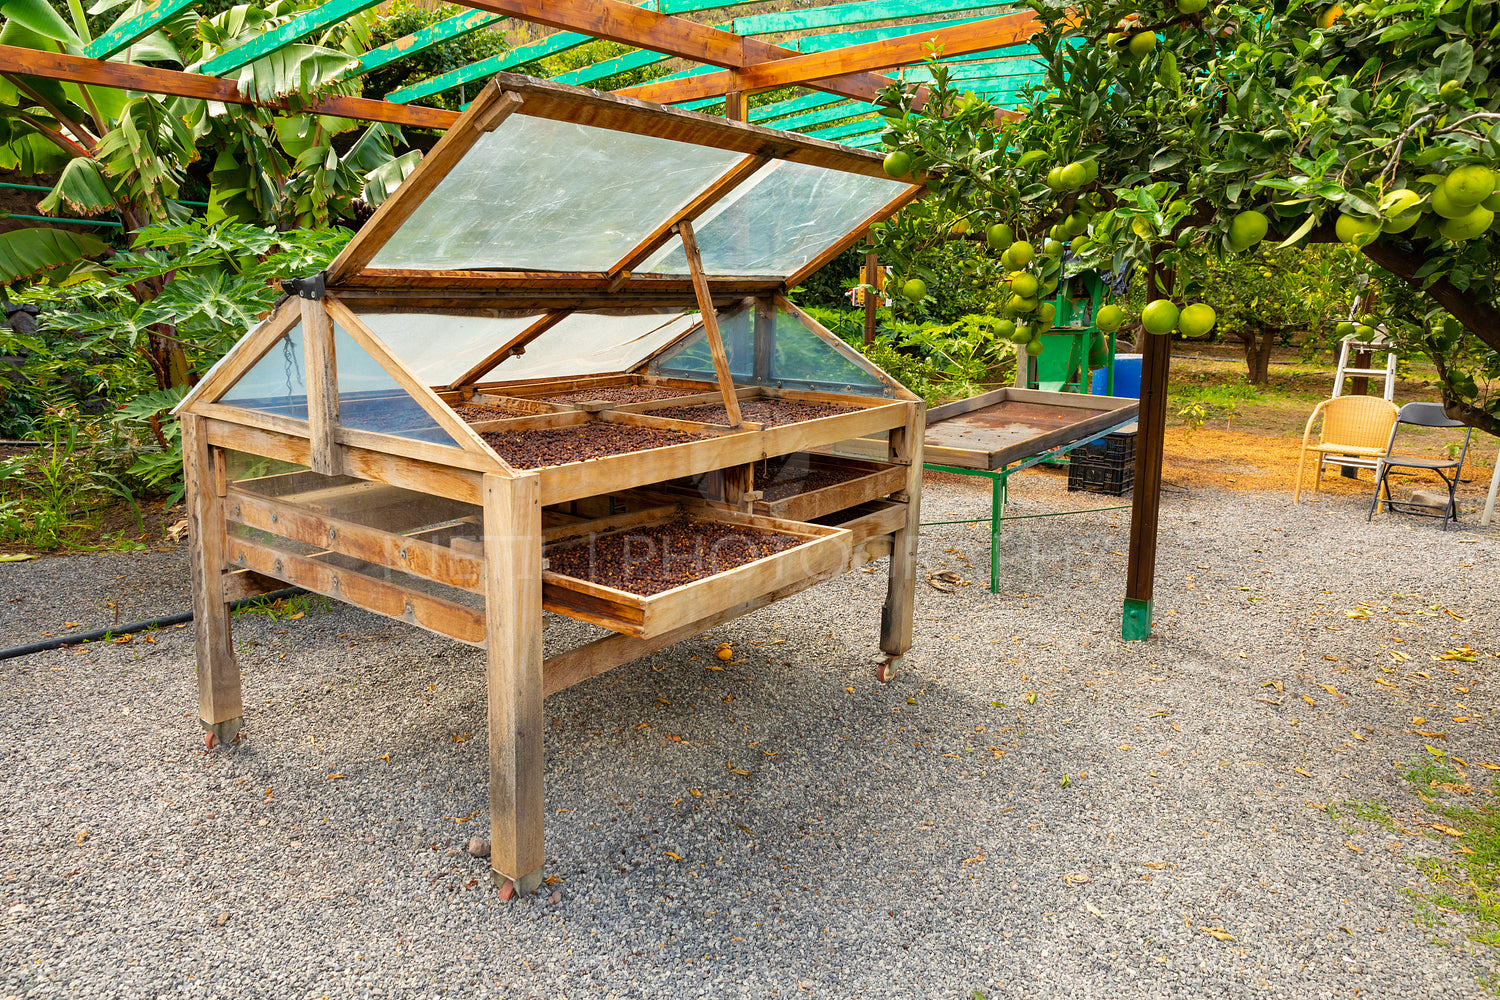 Organic Coffee Beans Drying In Crates in Plantation